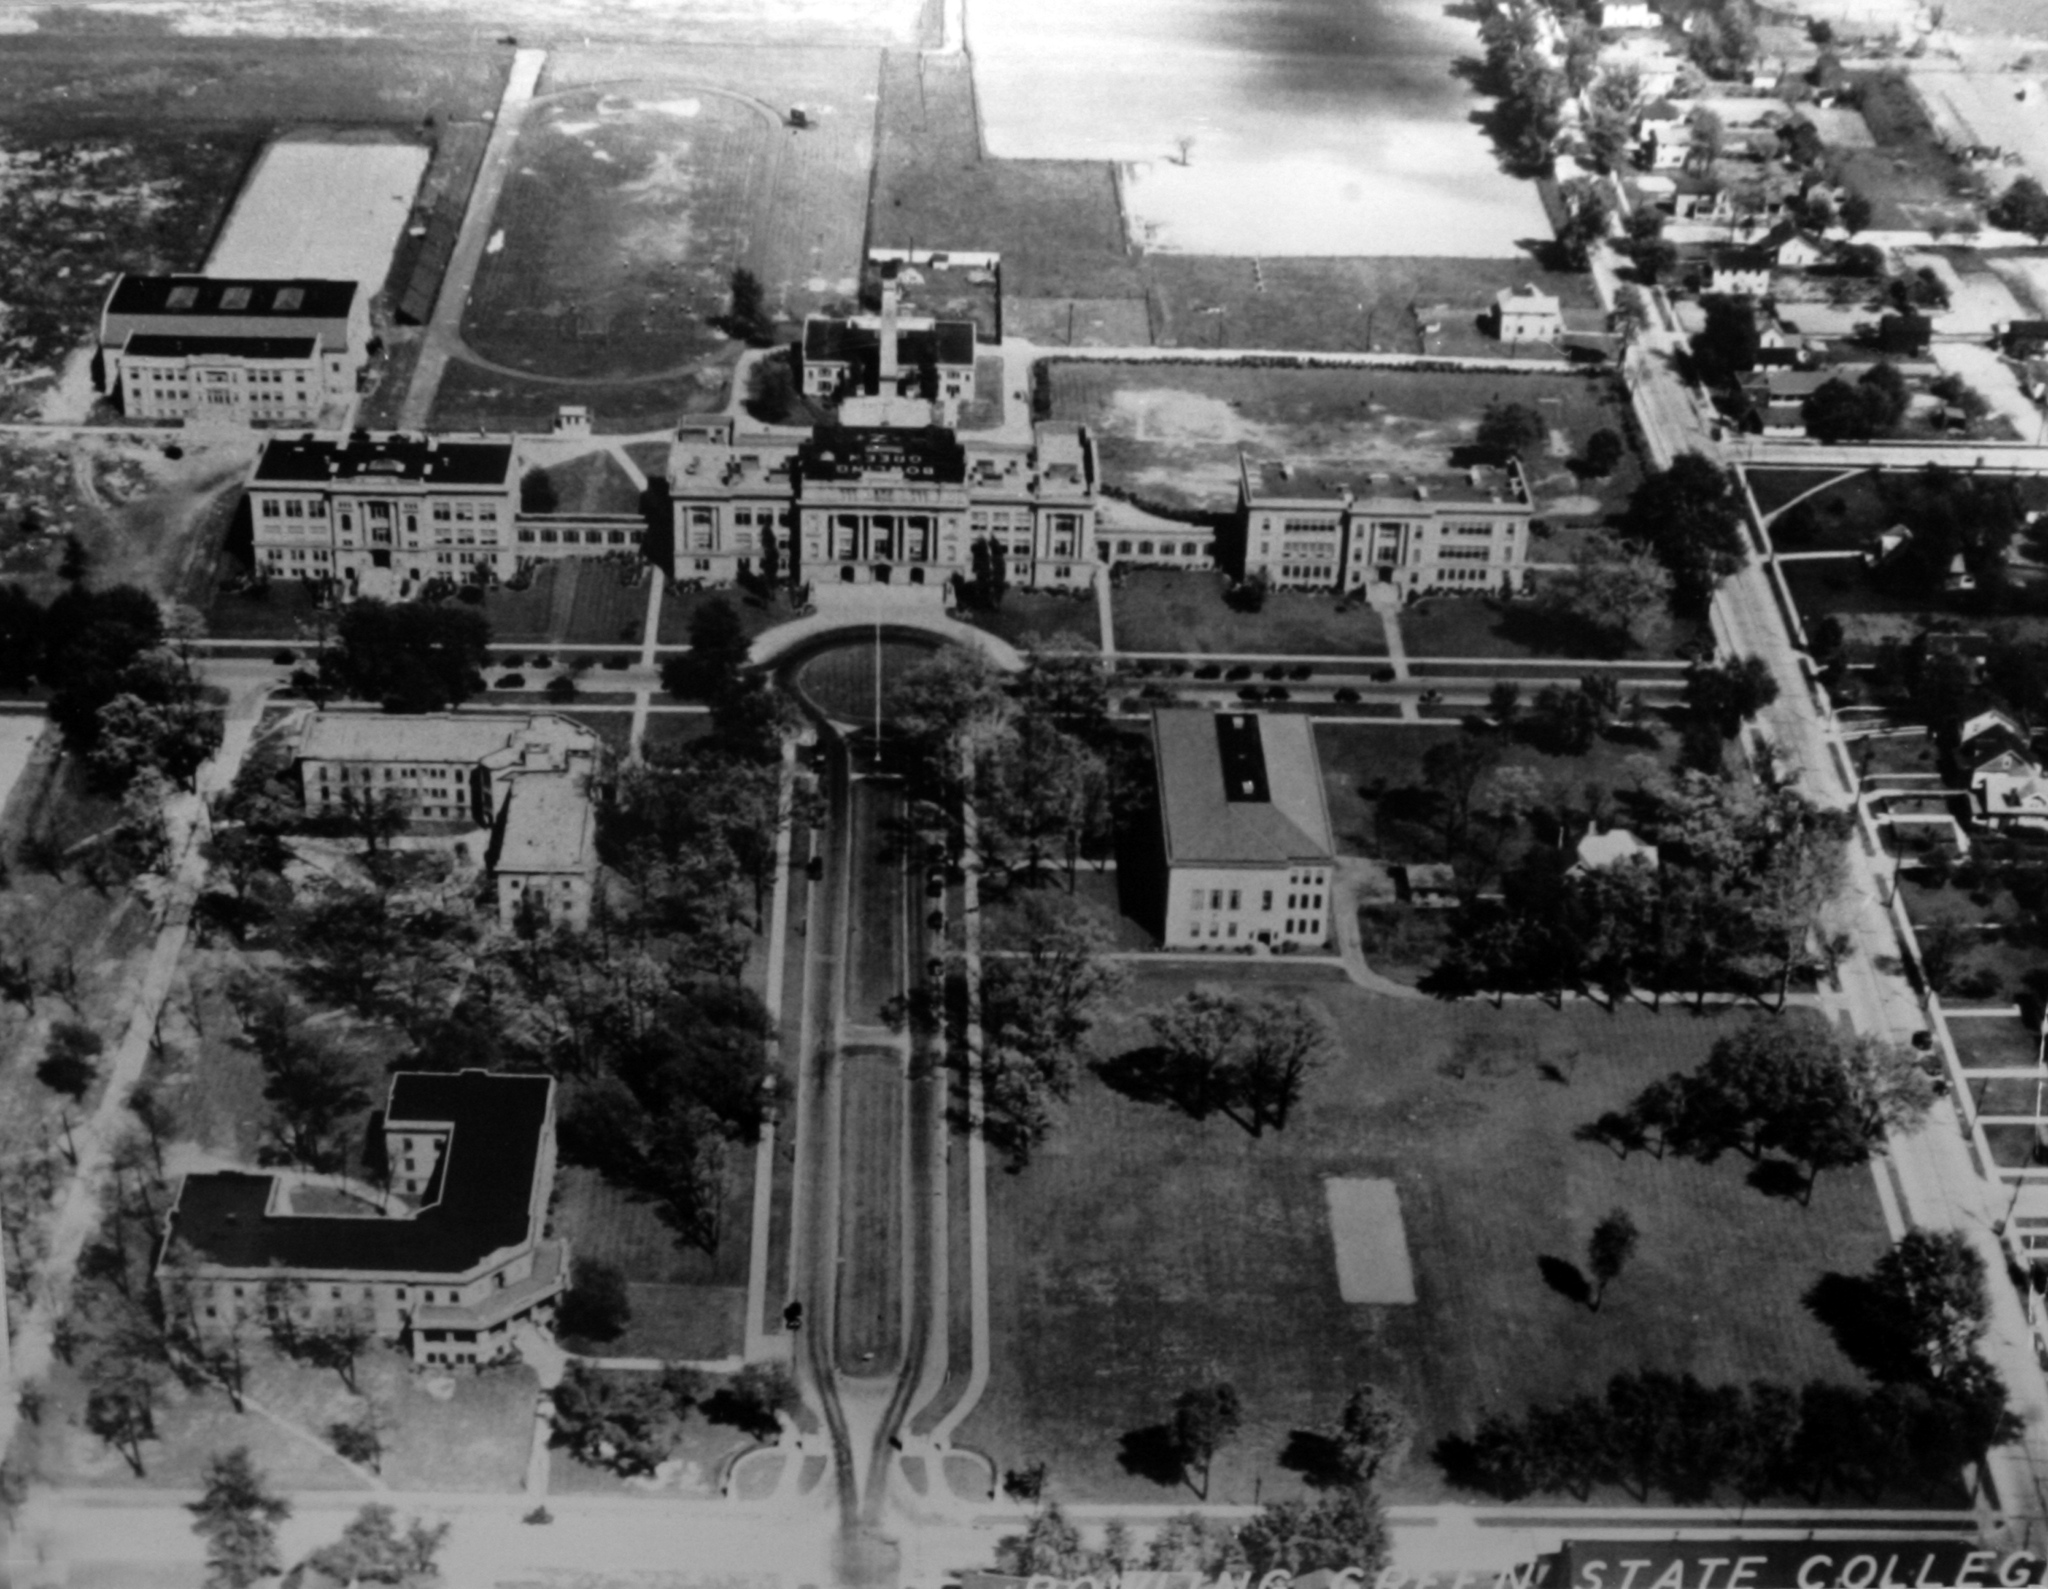 An early aerial photo shows the campus of Bowling Green State College as it was known at the time. 